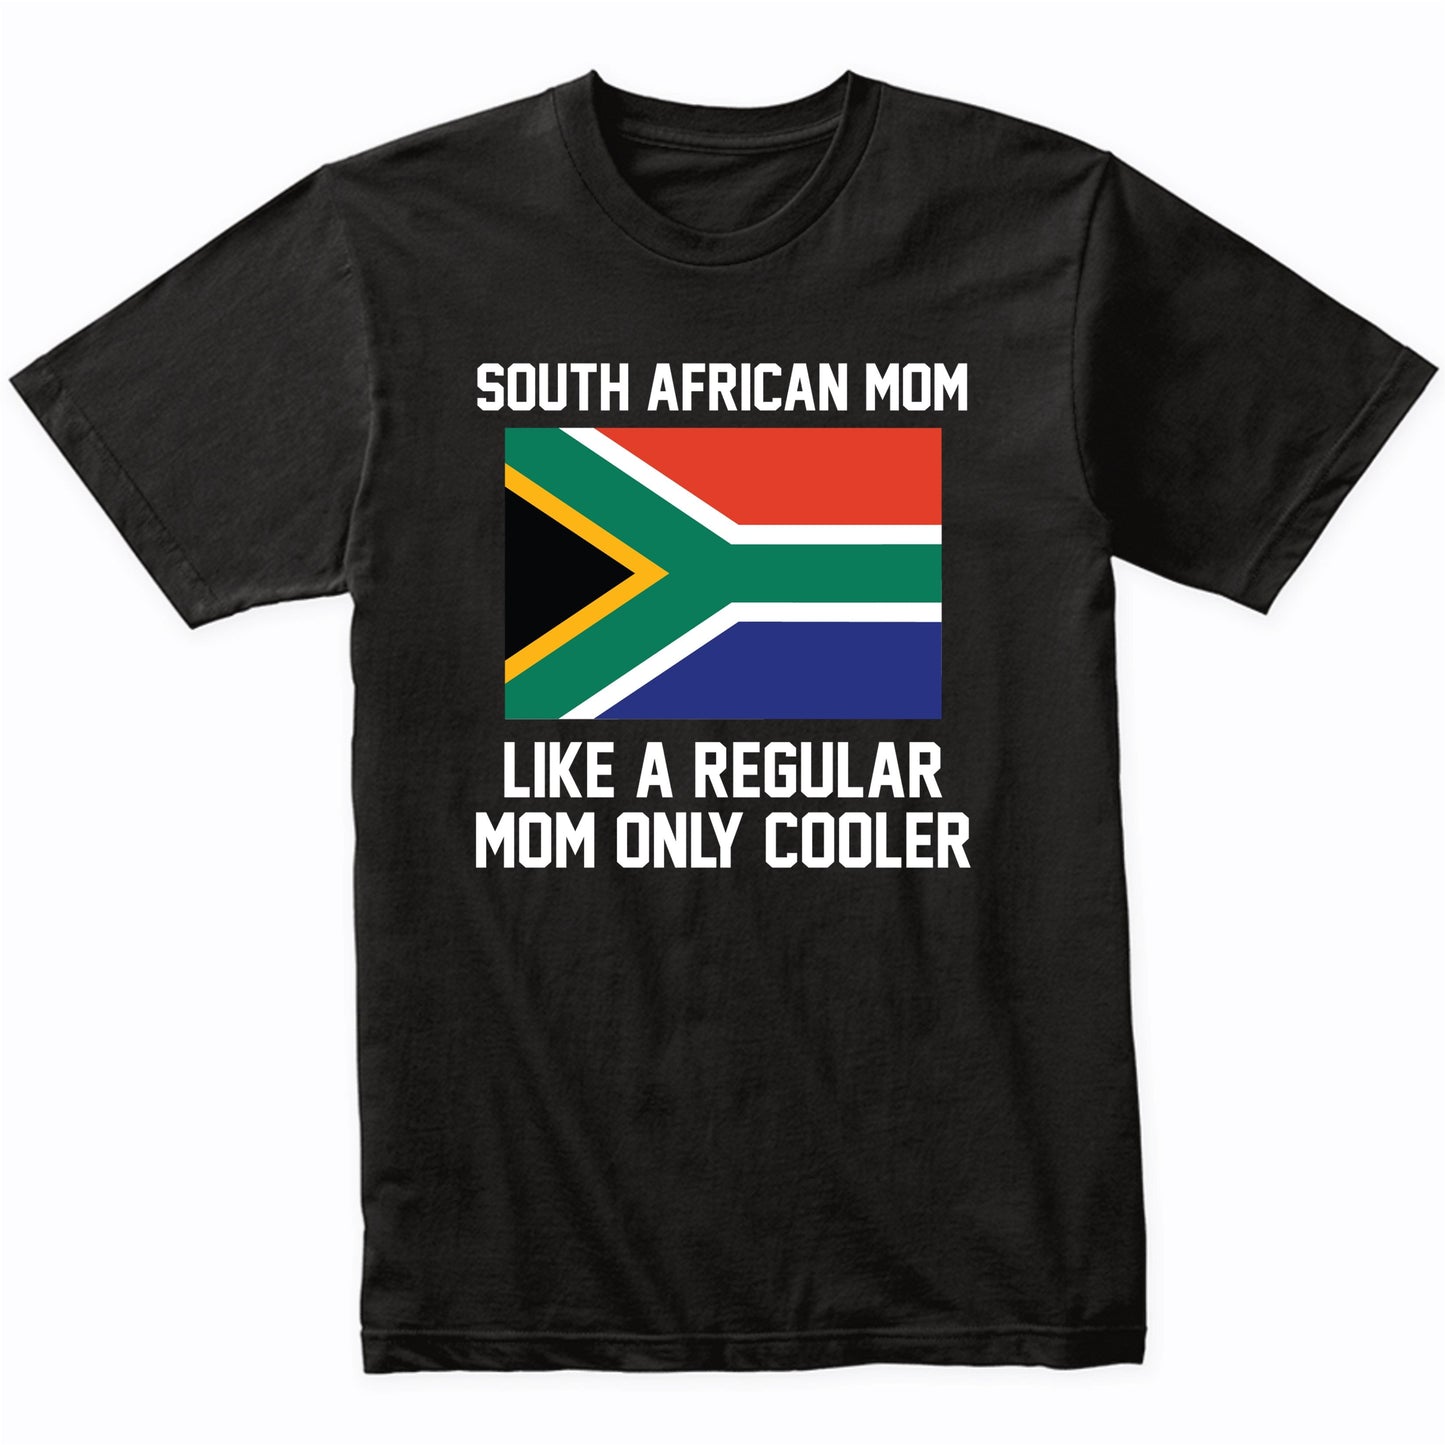 South African Mom Like A Regular Mom Only Cooler Shirt